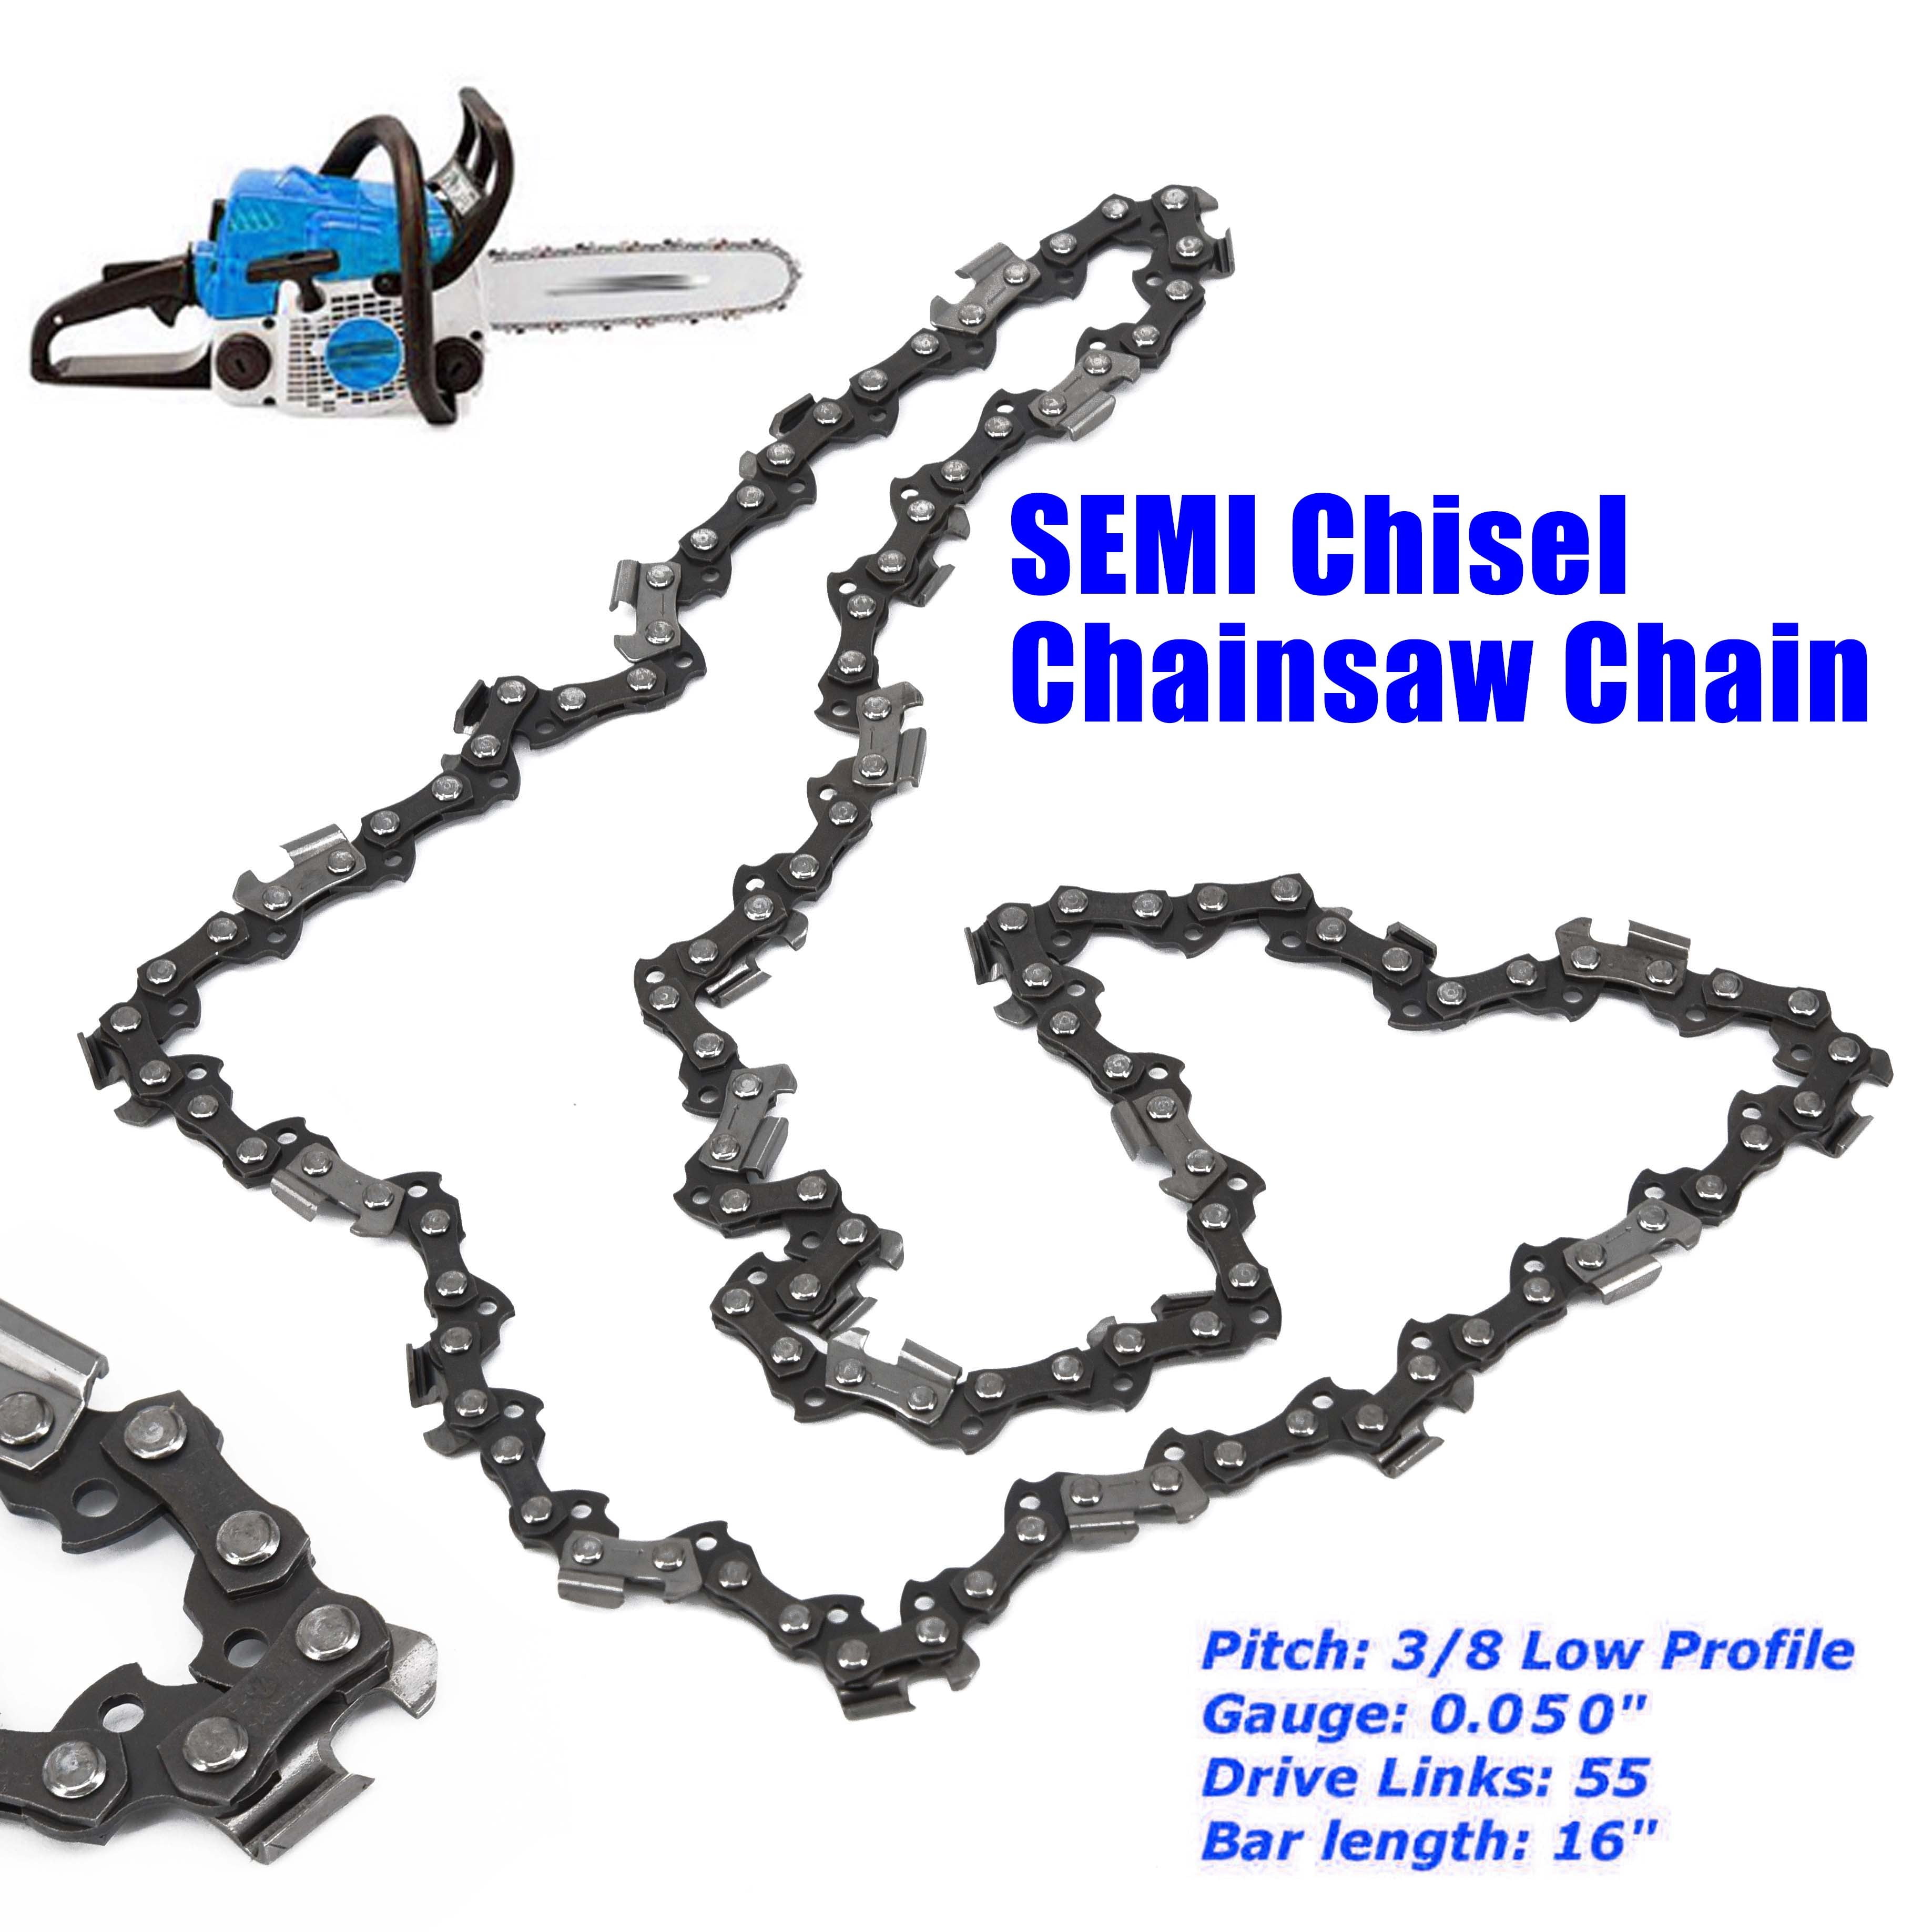 STIHL 3/8 Pitch PS RACING CHAIN 32 inch Cannon 100 drivers full chisel .050 gaug 